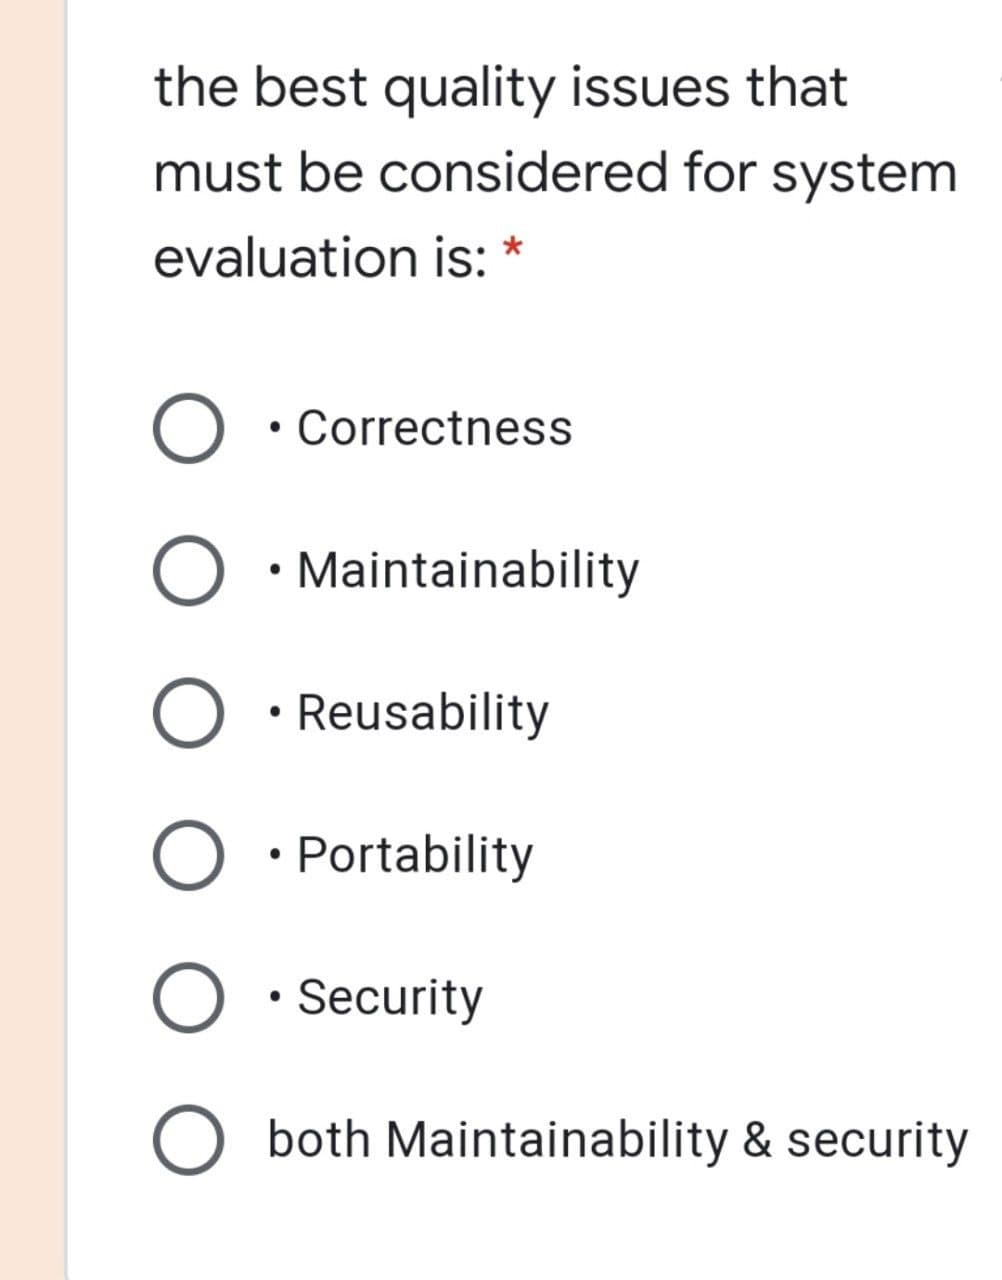 the best quality issues that
must be considered for system
evaluation is: *
• Correctness
• Maintainability
O • Reusability
O • Portability
O • Security
O both Maintainability & security
